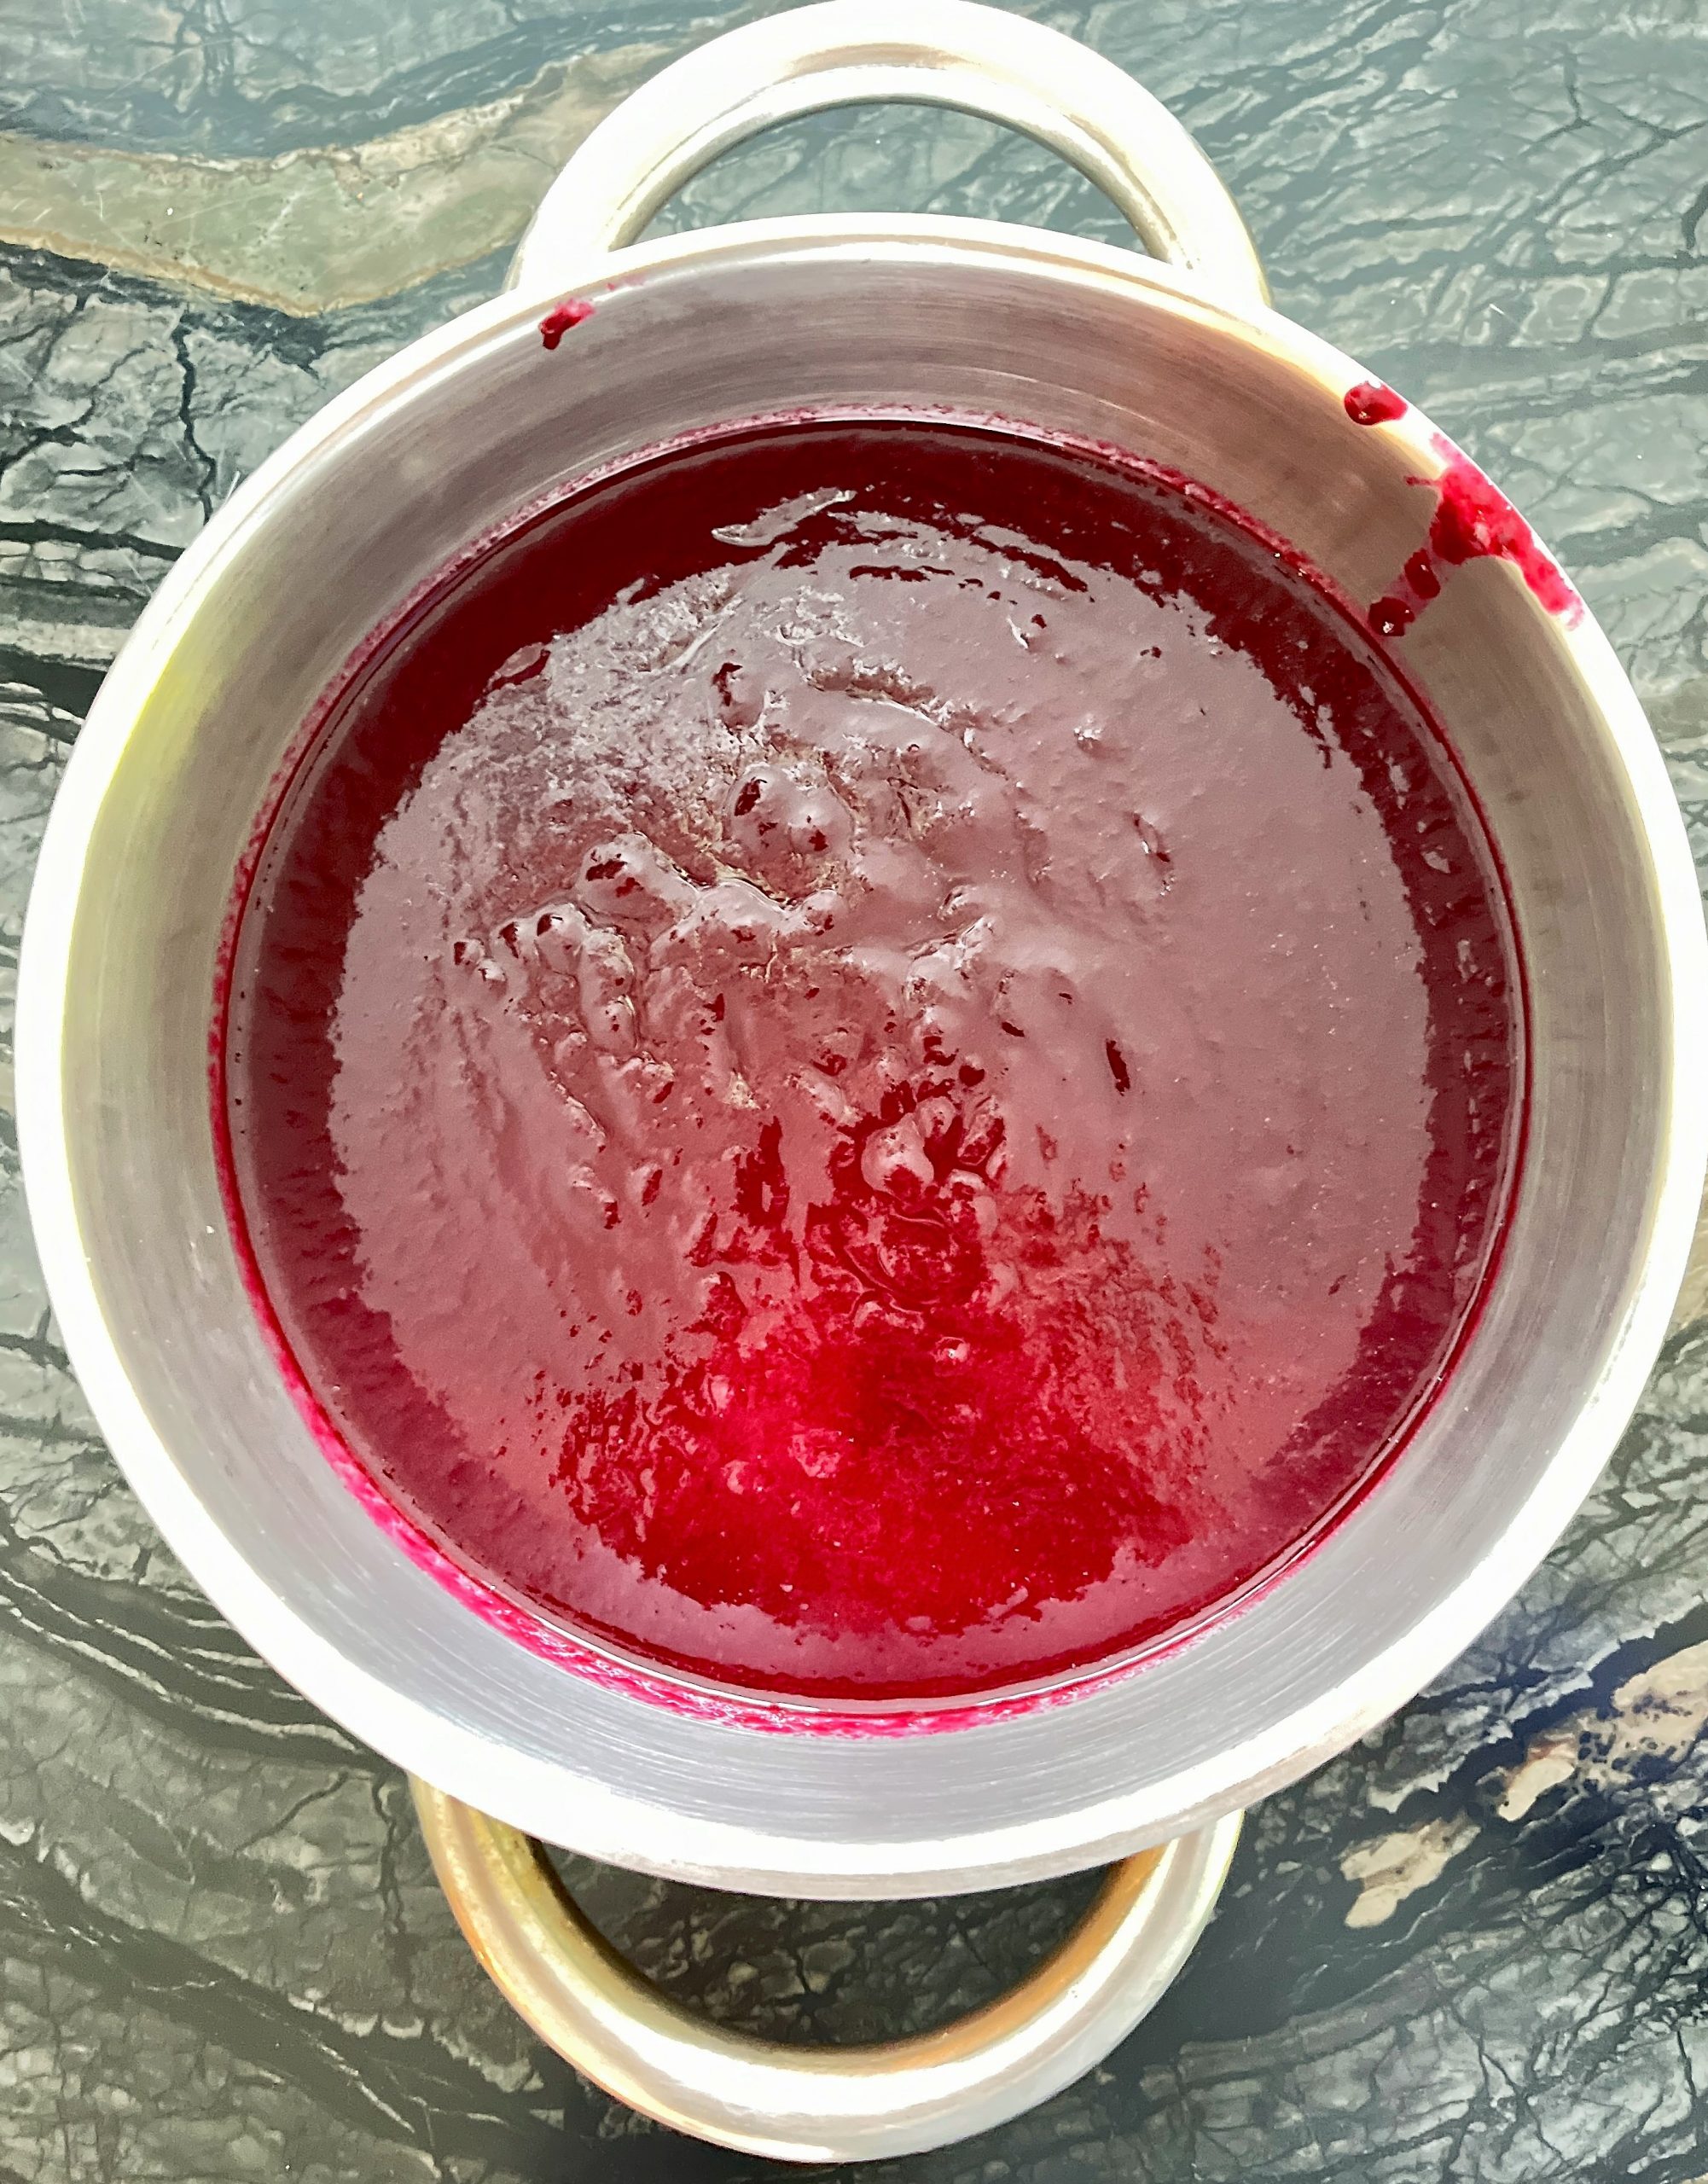 Concord Grapes Jam Recipe: cook the strained jam, simmer for 30 more minutes